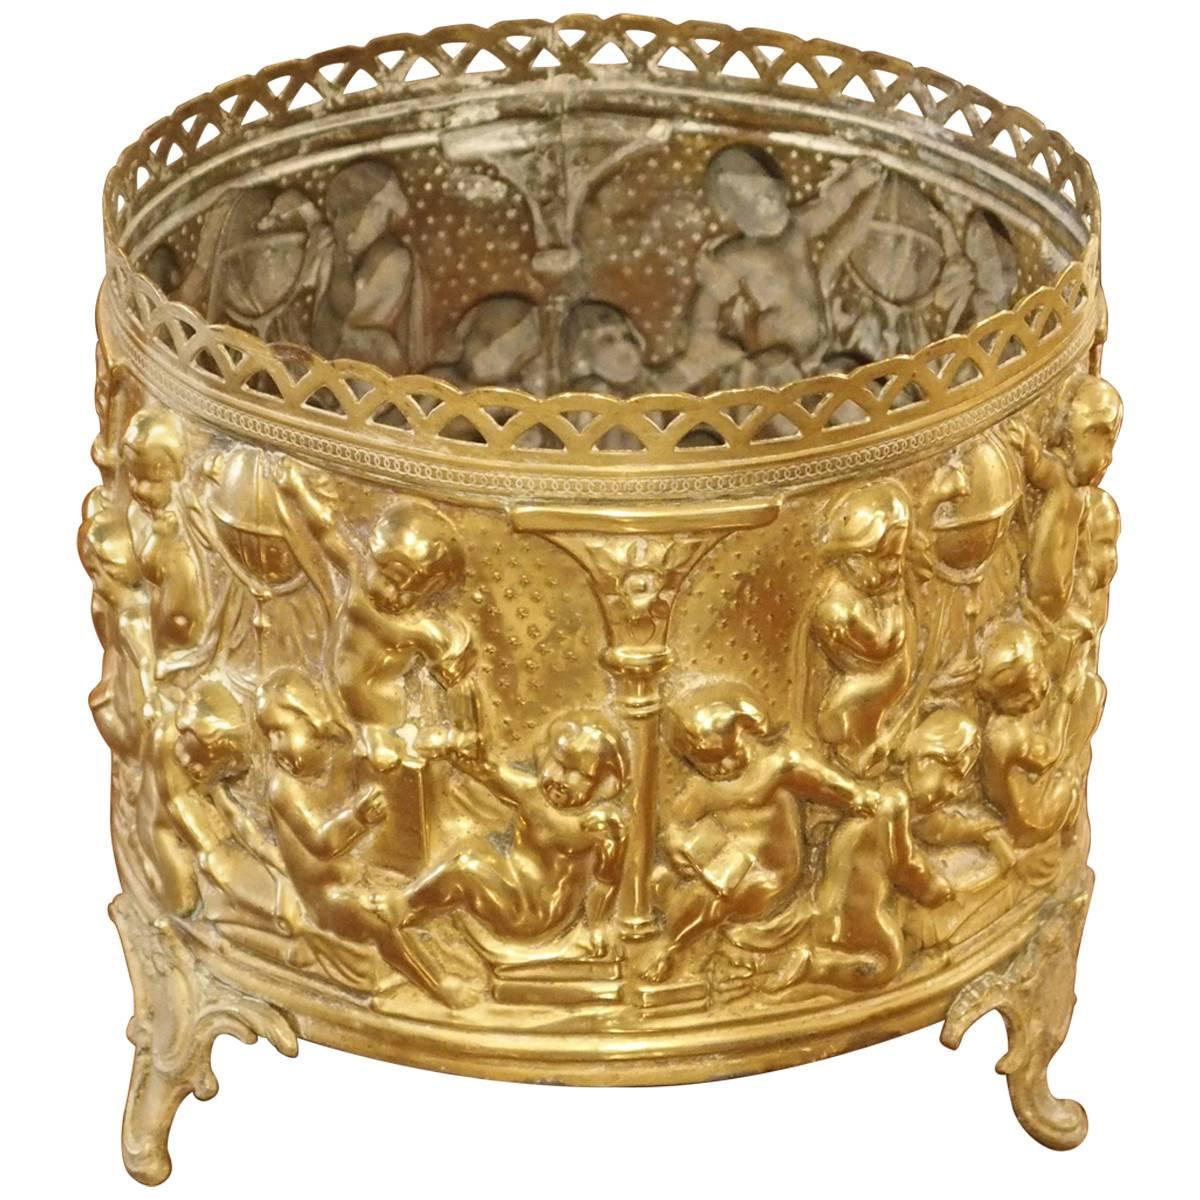 Small Antique French Brass Repousse Planter, circa 1900